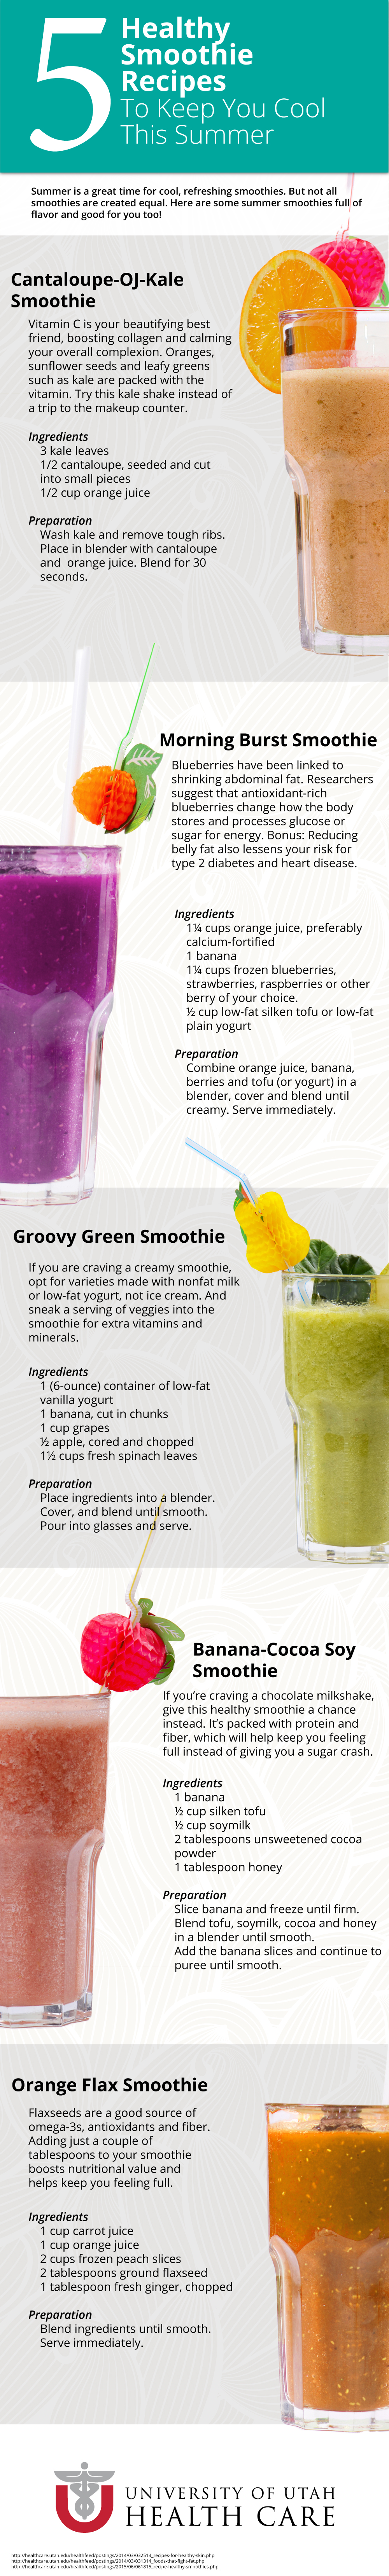 Smoothies Infographic